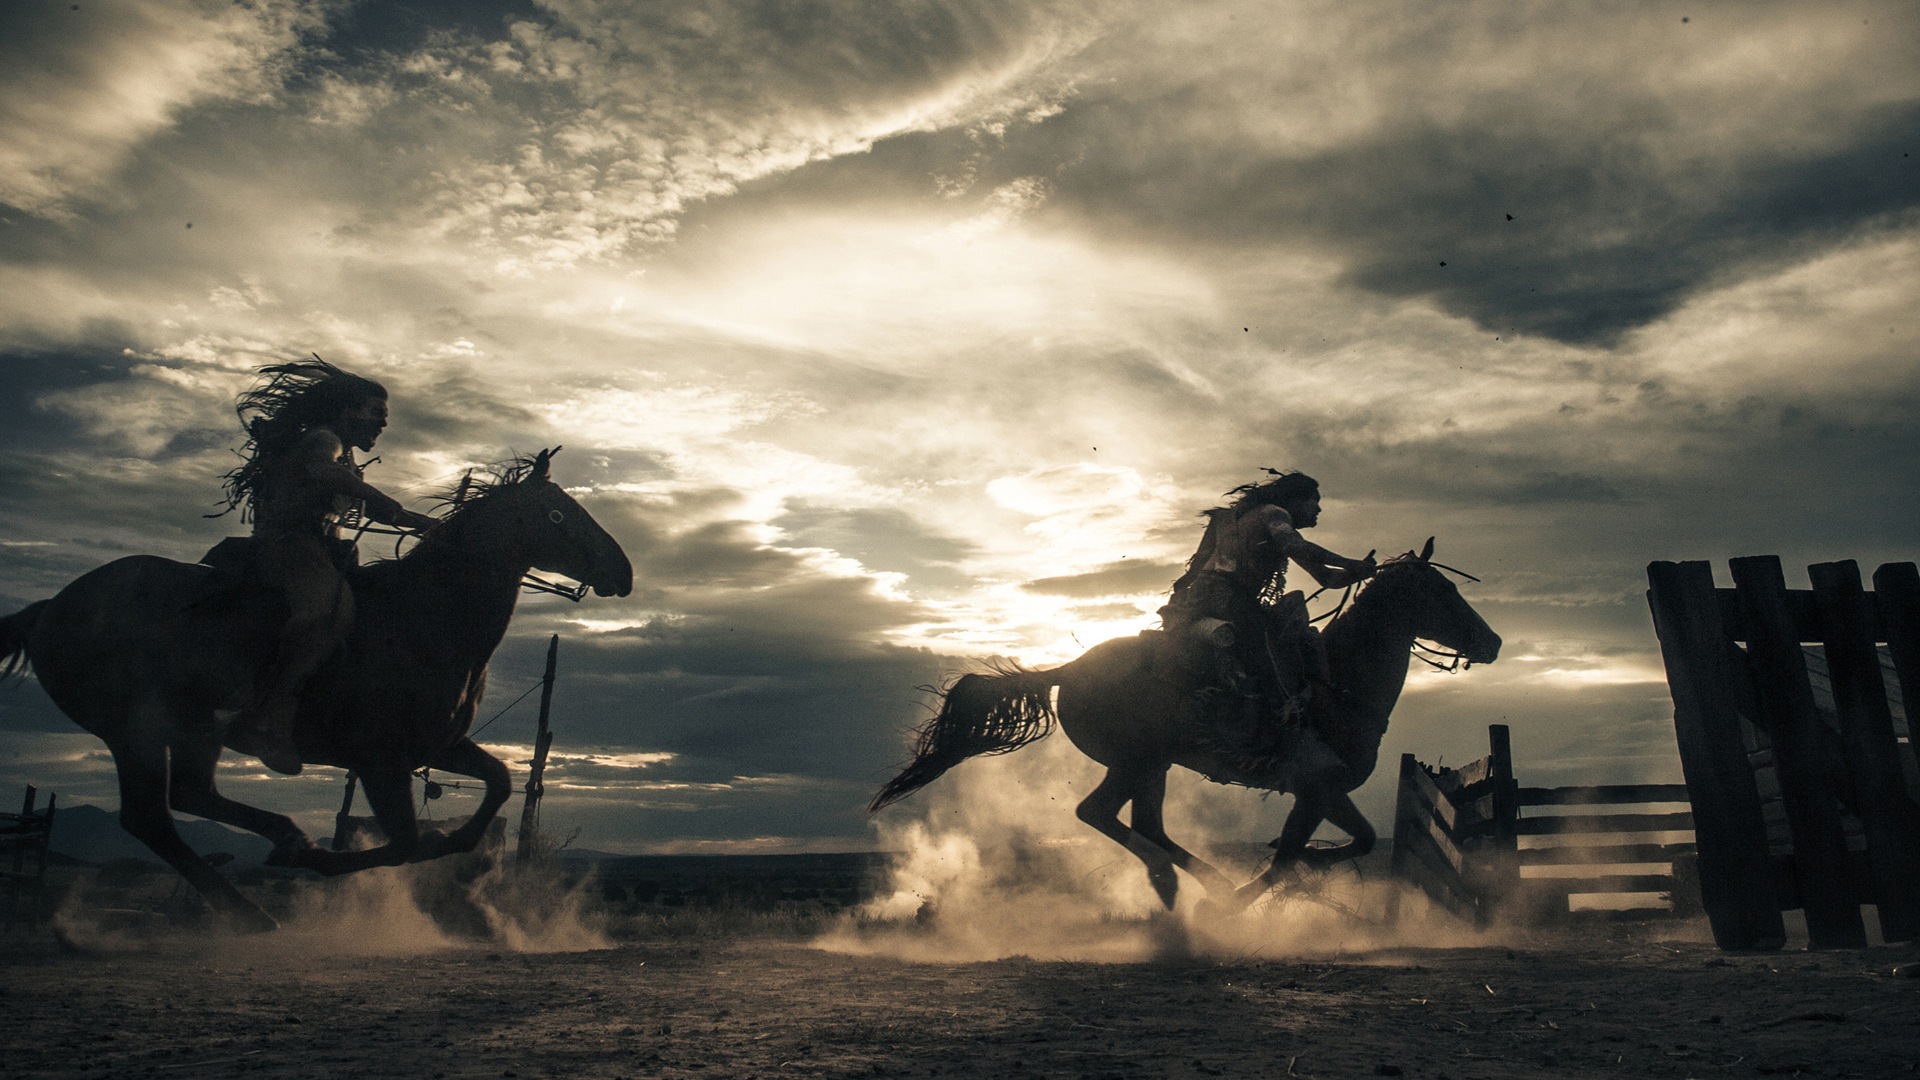 The Lone Ranger HD movie wallpapers #3 - 1920x1080